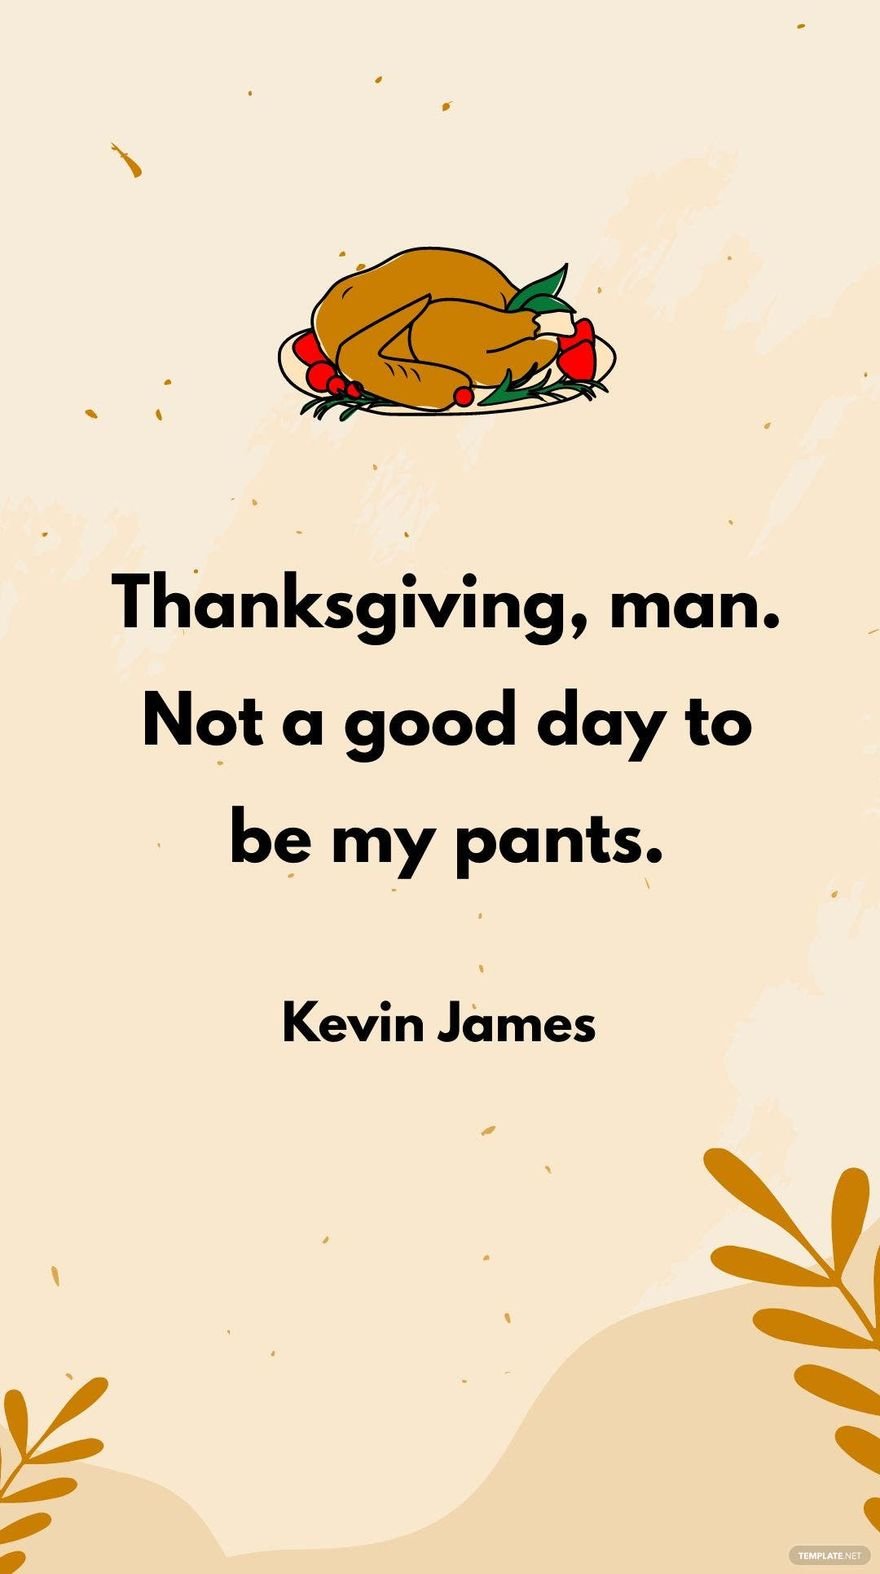 Free Kevin James - Thanksgiving, man. Not a good day to be my pants. in JPG